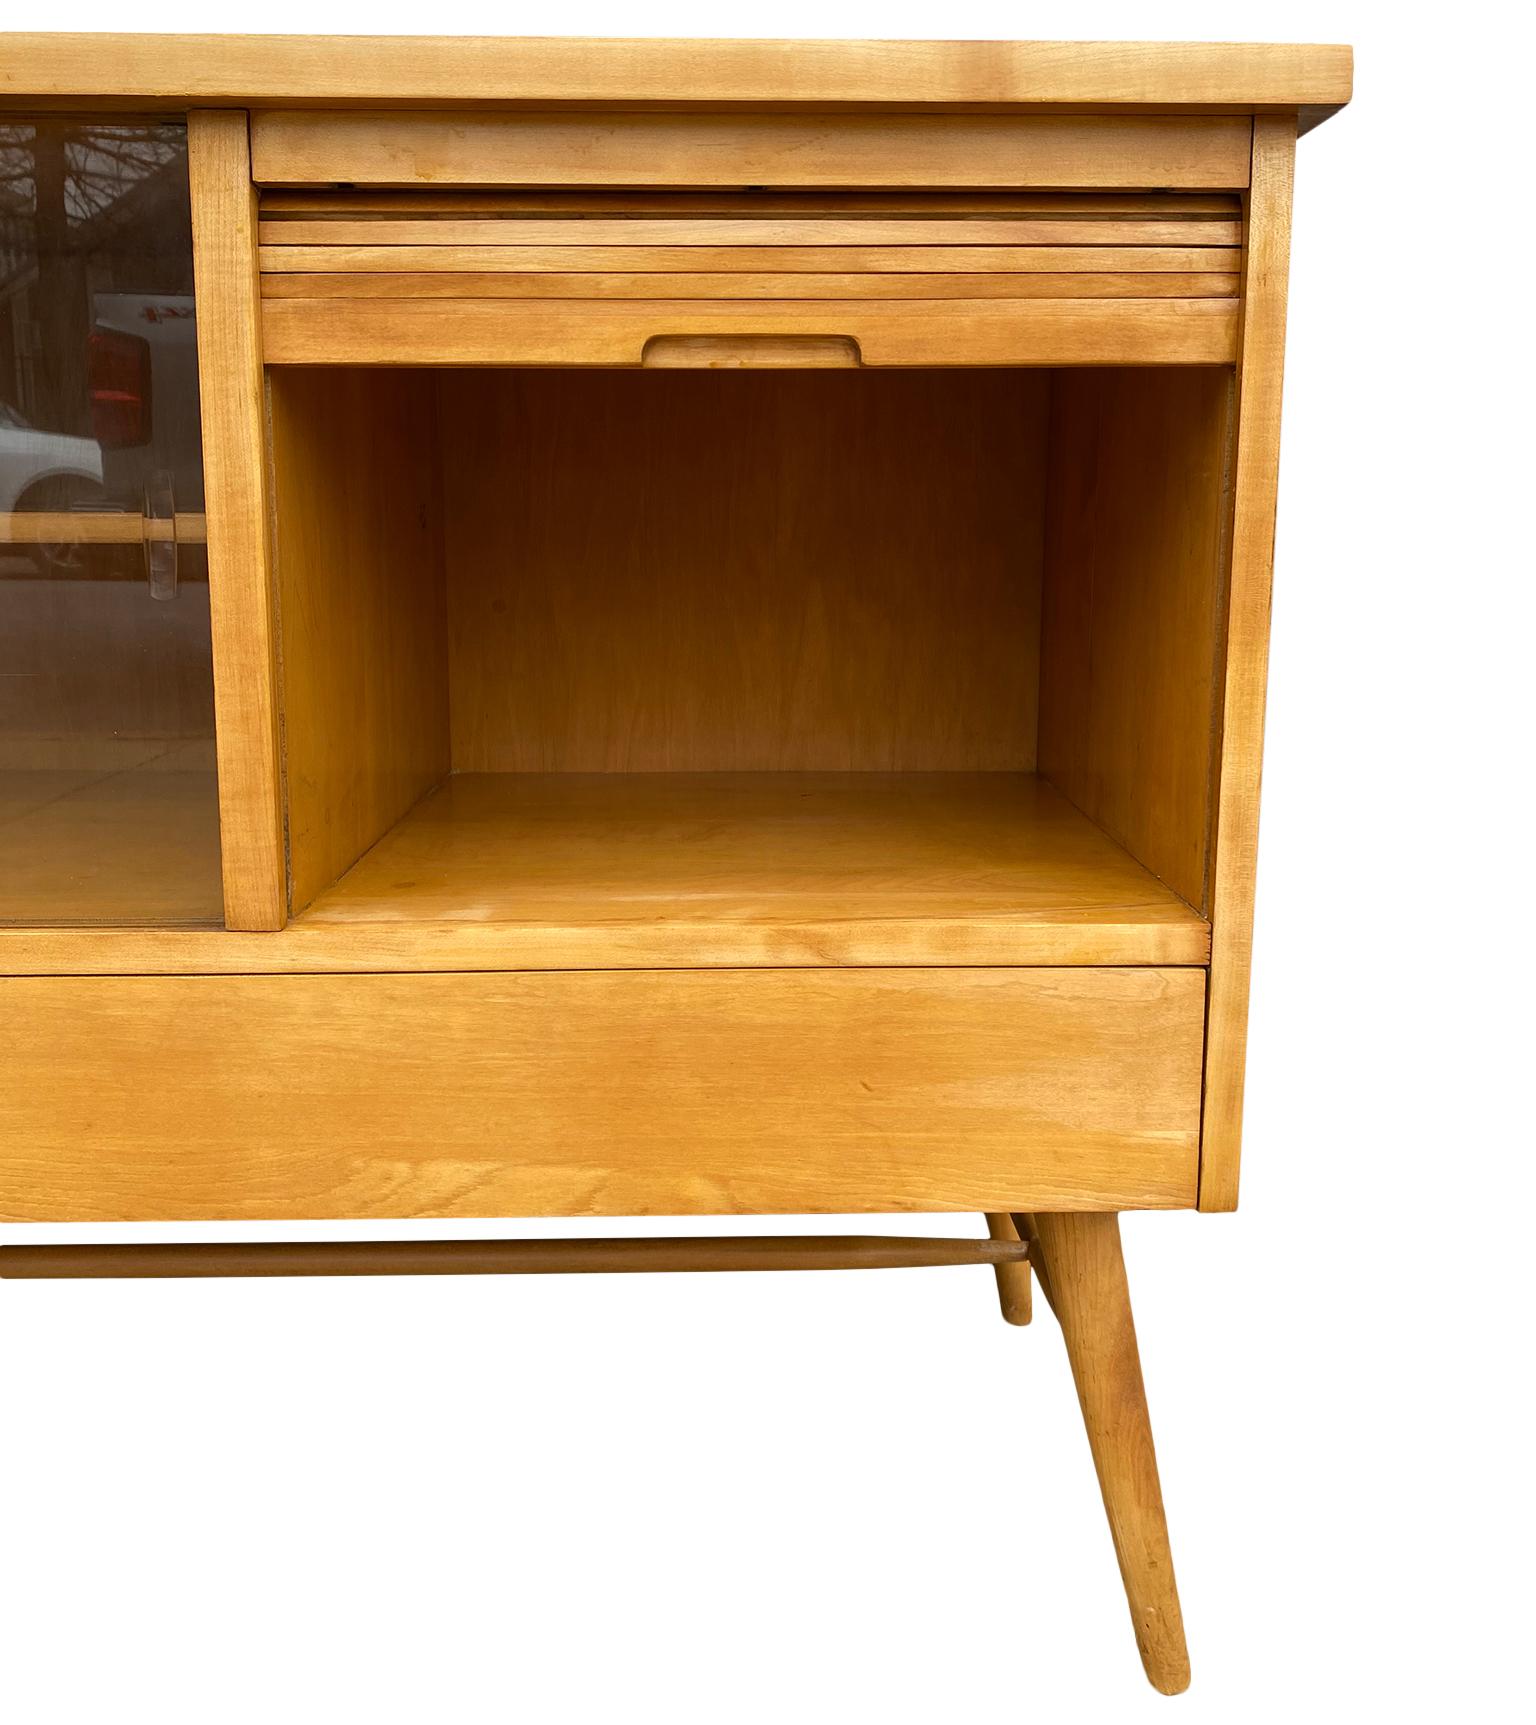 Very Rare Mid-Century Modern Maple Predictor Credenza by Paul McCobb for O’hearn For Sale 3